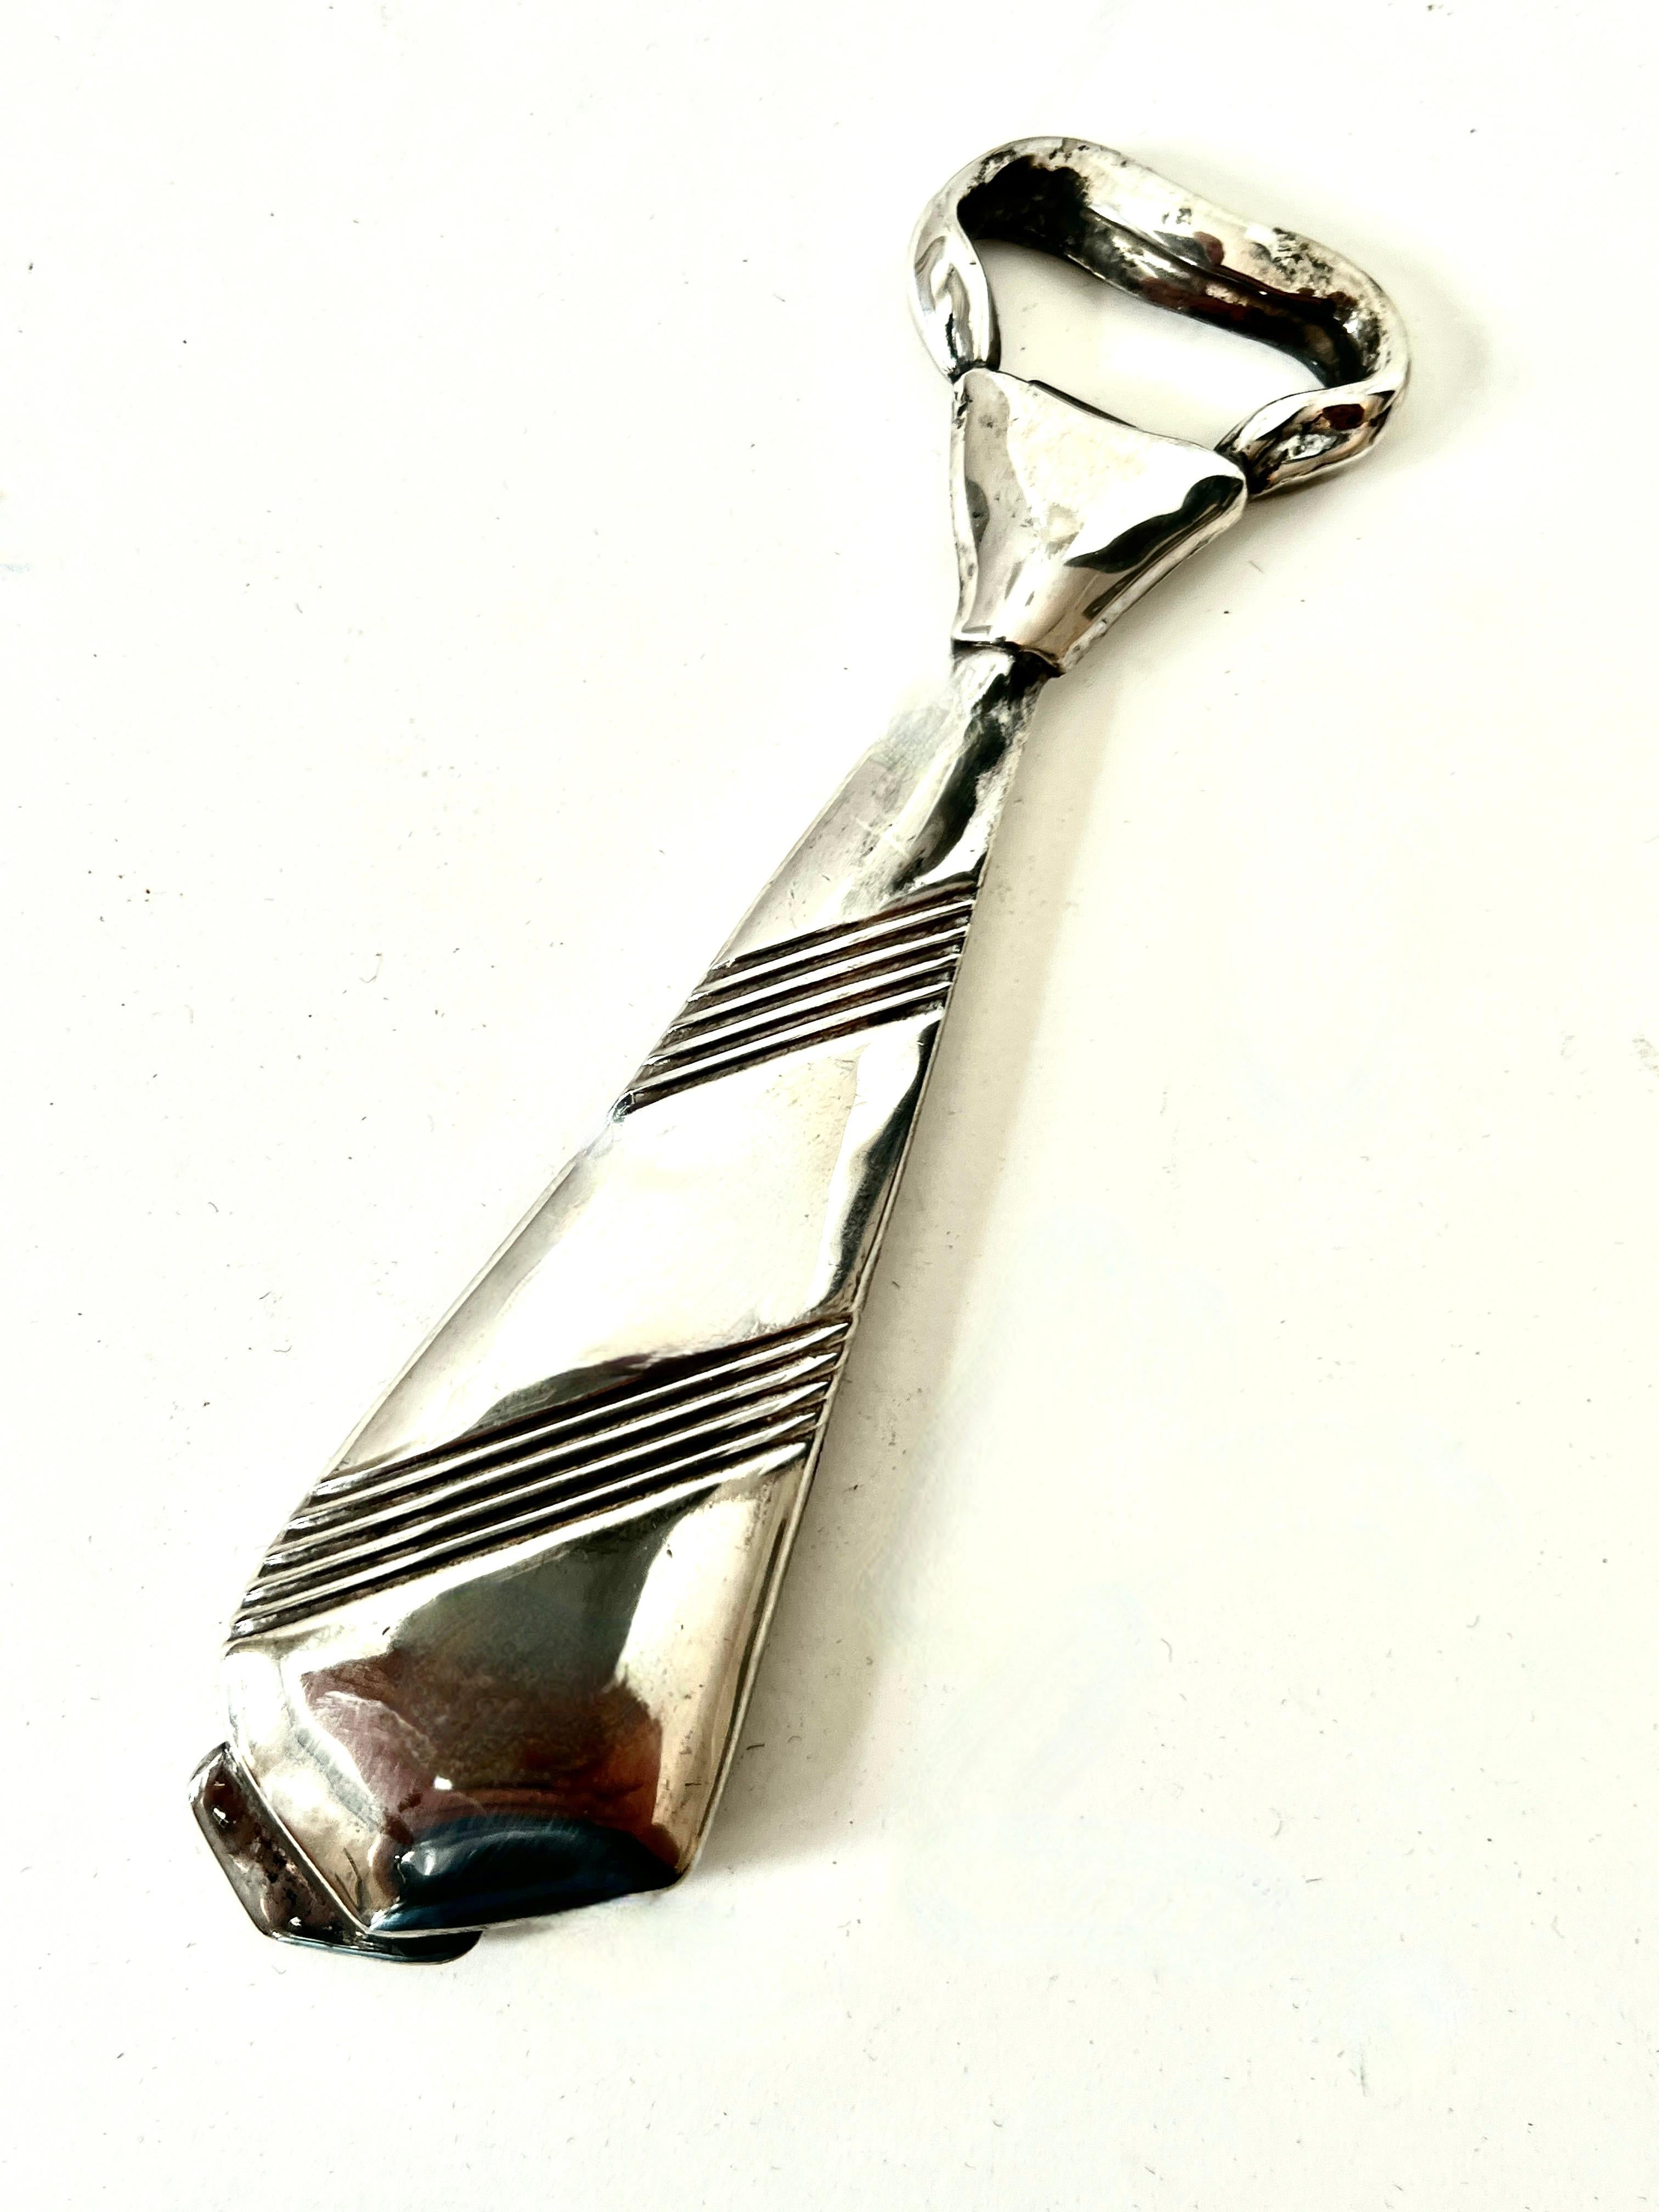 A clever designed Silver plated bottle opener.  The Opener is in the shape of a bow tie.  A novel bar accessory, perhaps for the workaholic that needs something neat at the end of the day.

The tie is Italian so it has to be fashionable...

The